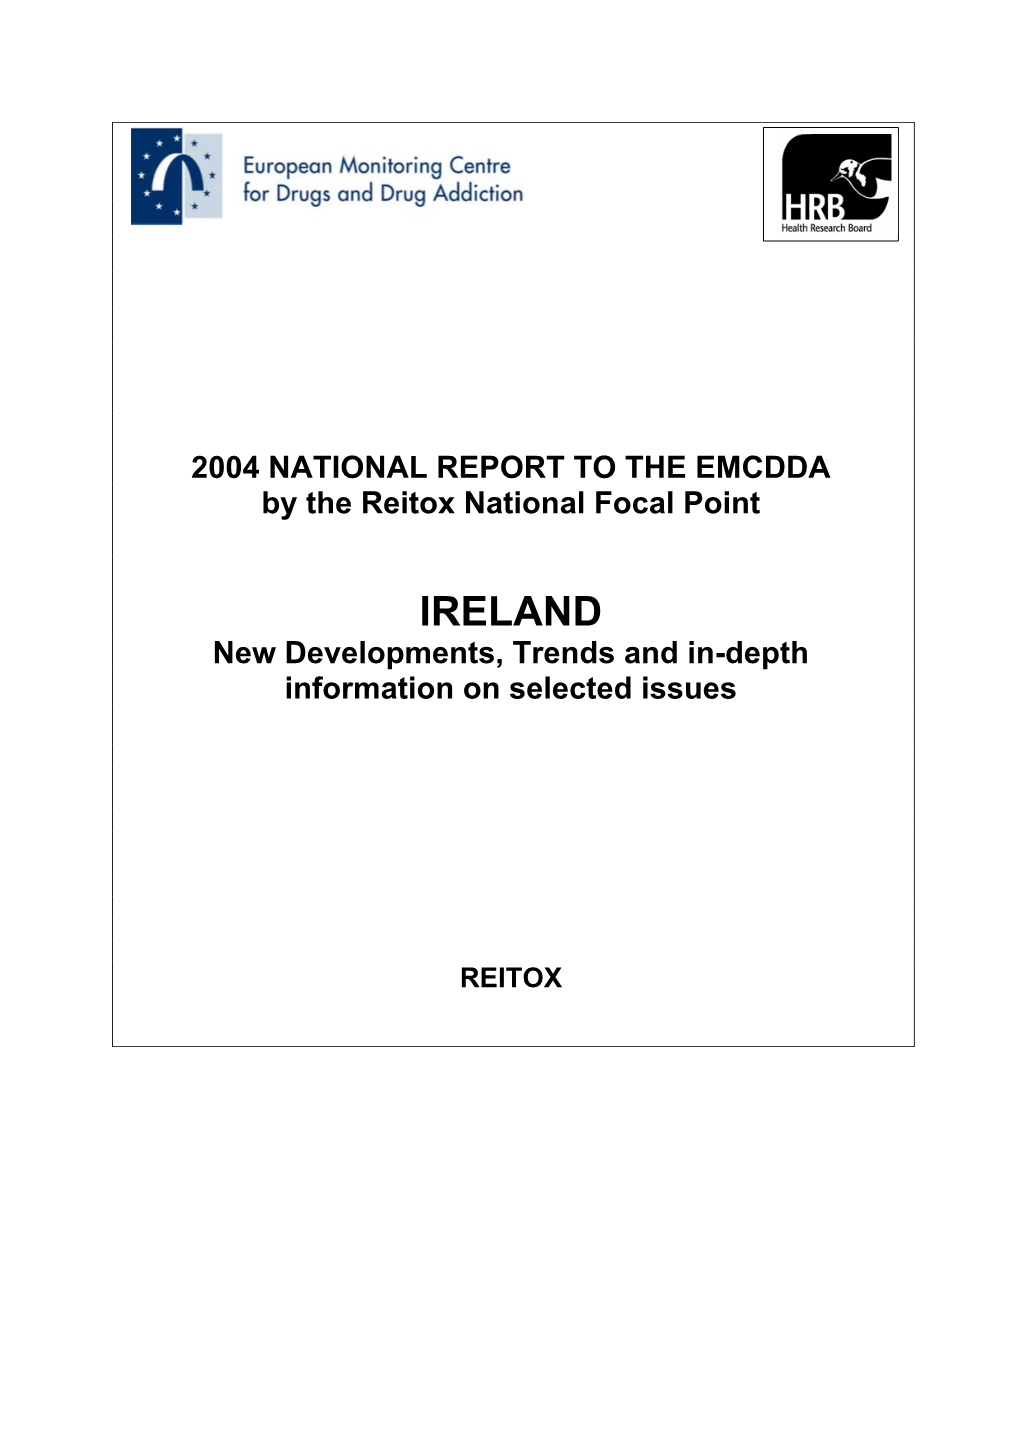 IRELAND New Developments, Trends and In-Depth Information on Selected Issues